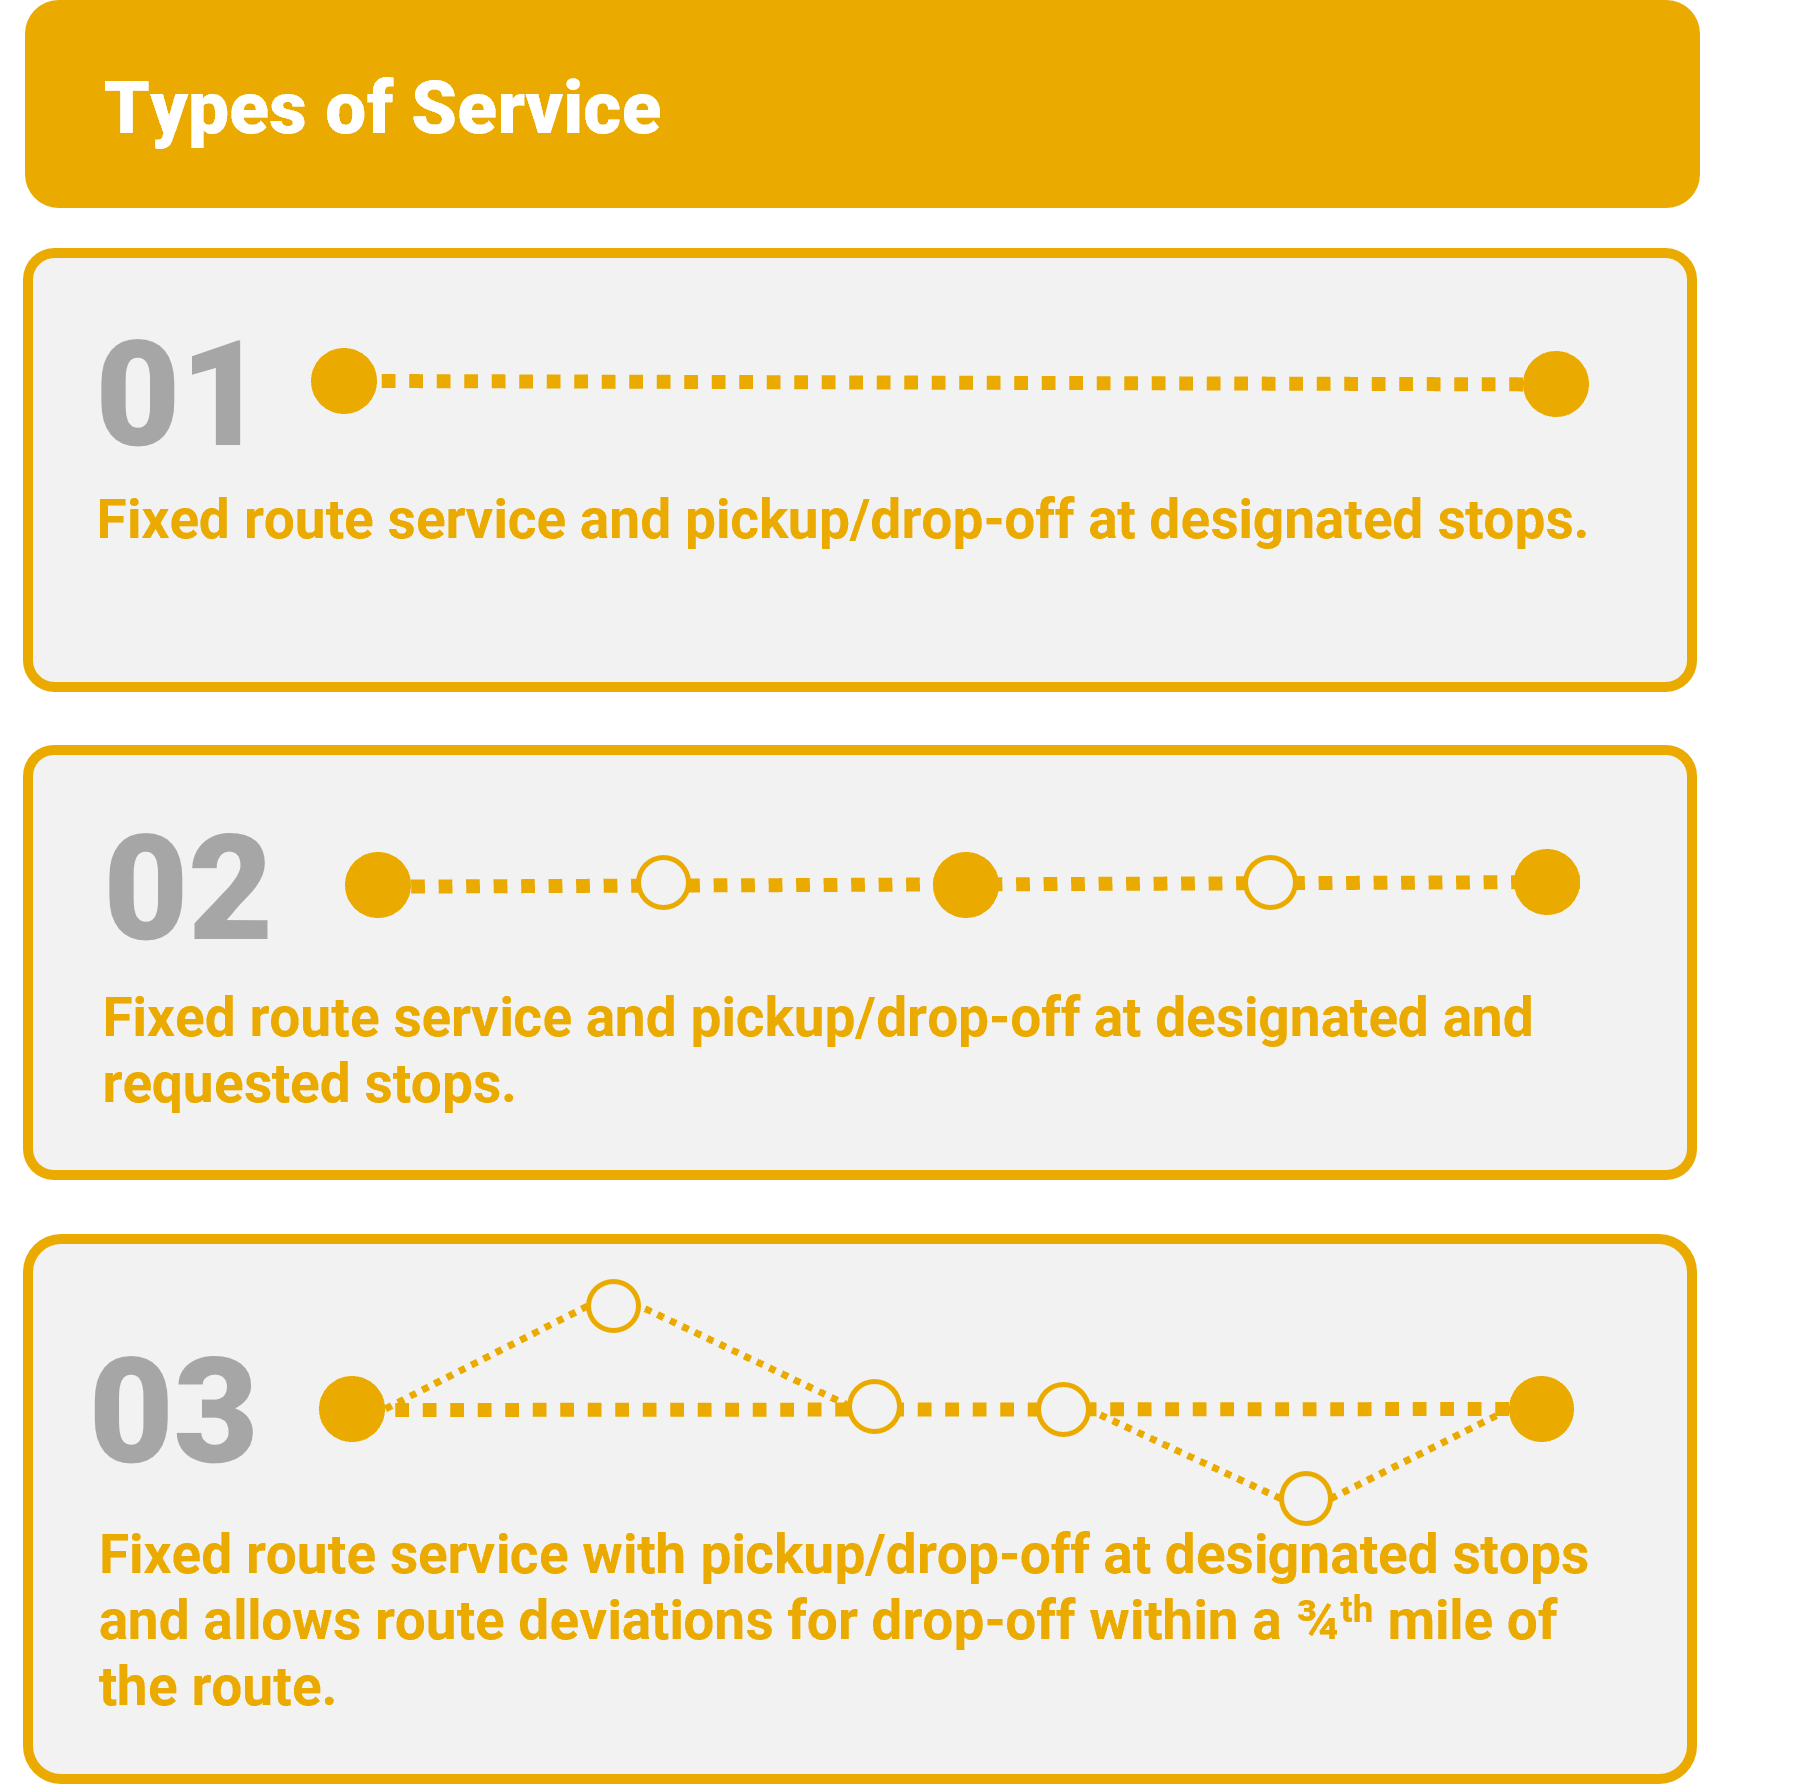 Types of Service